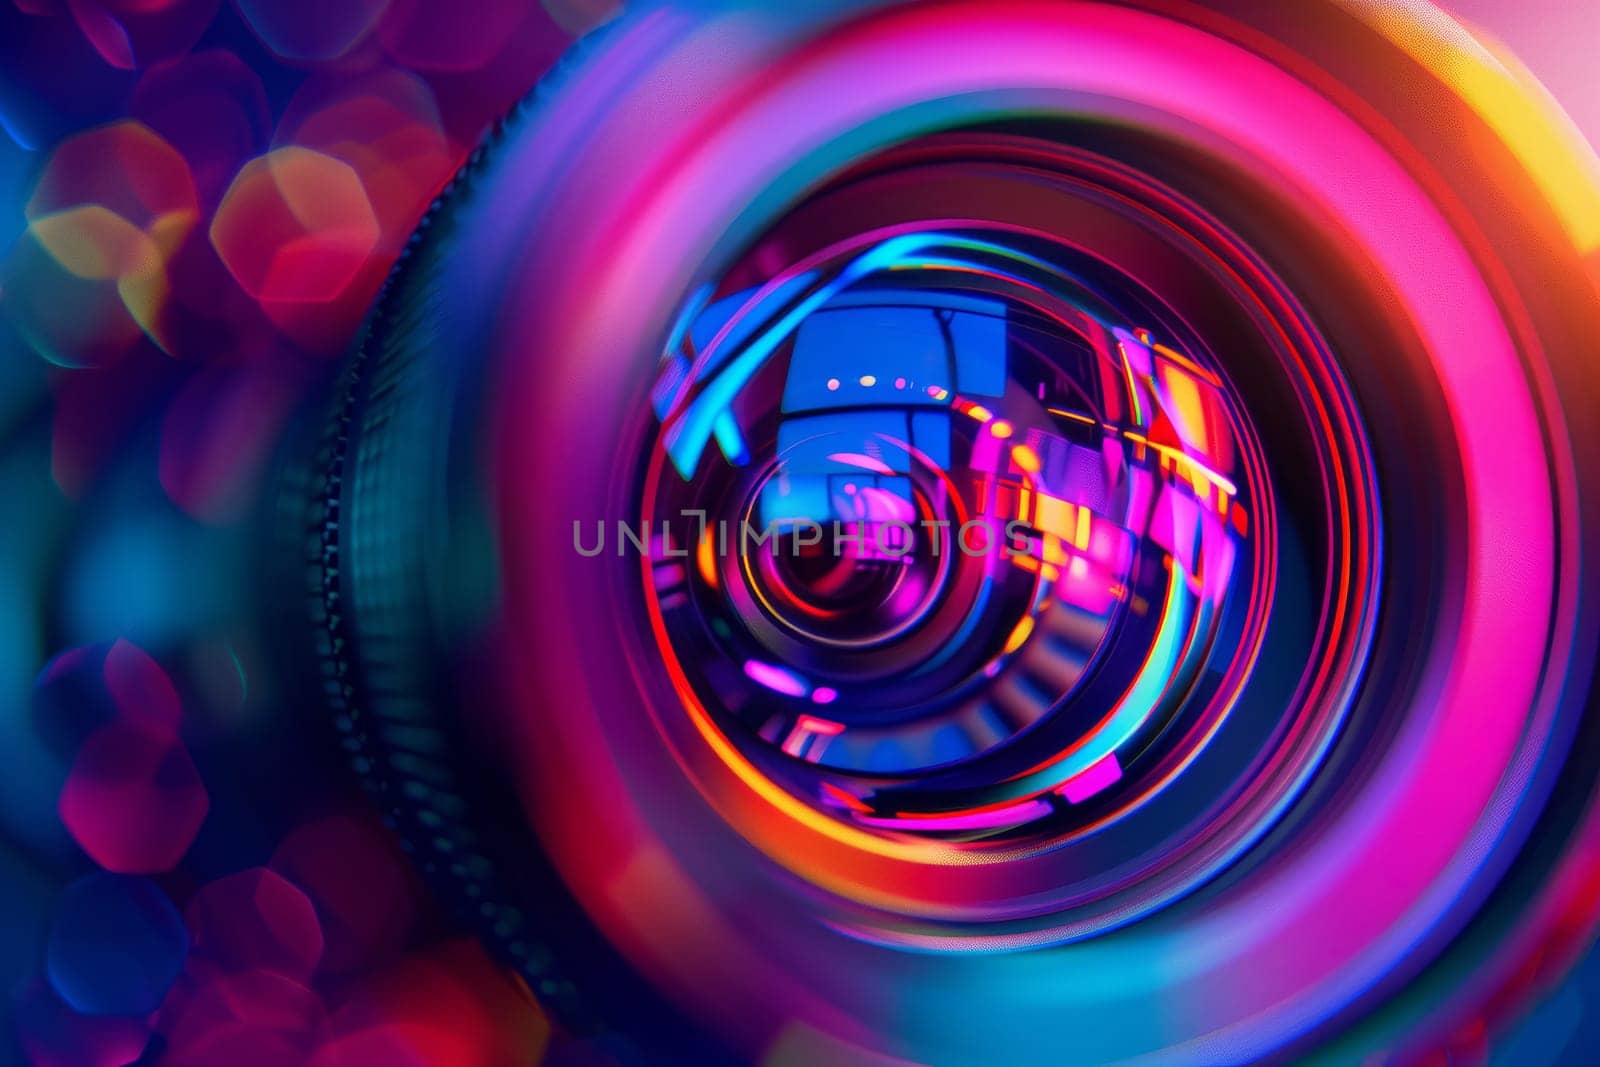 A close up of a camera lens with a colorful background, including shades of purple, violet, magenta, electric blue, and a circular gas. Perfect for entertainment and automotive lighting art